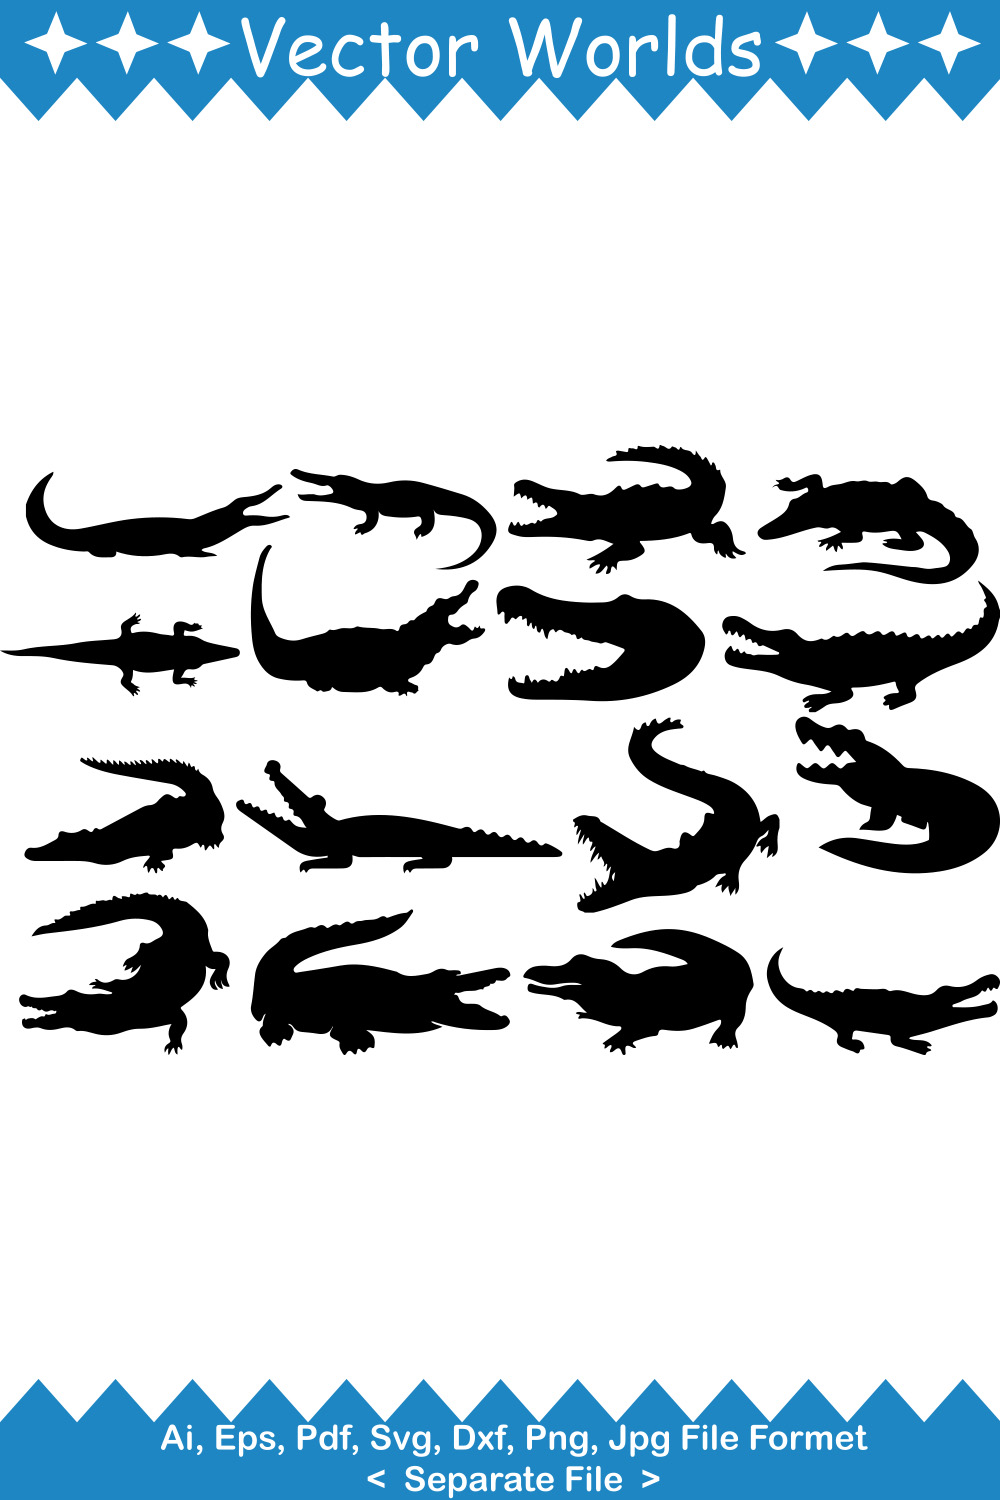 Set of alligators silhouettes with stars in the background.